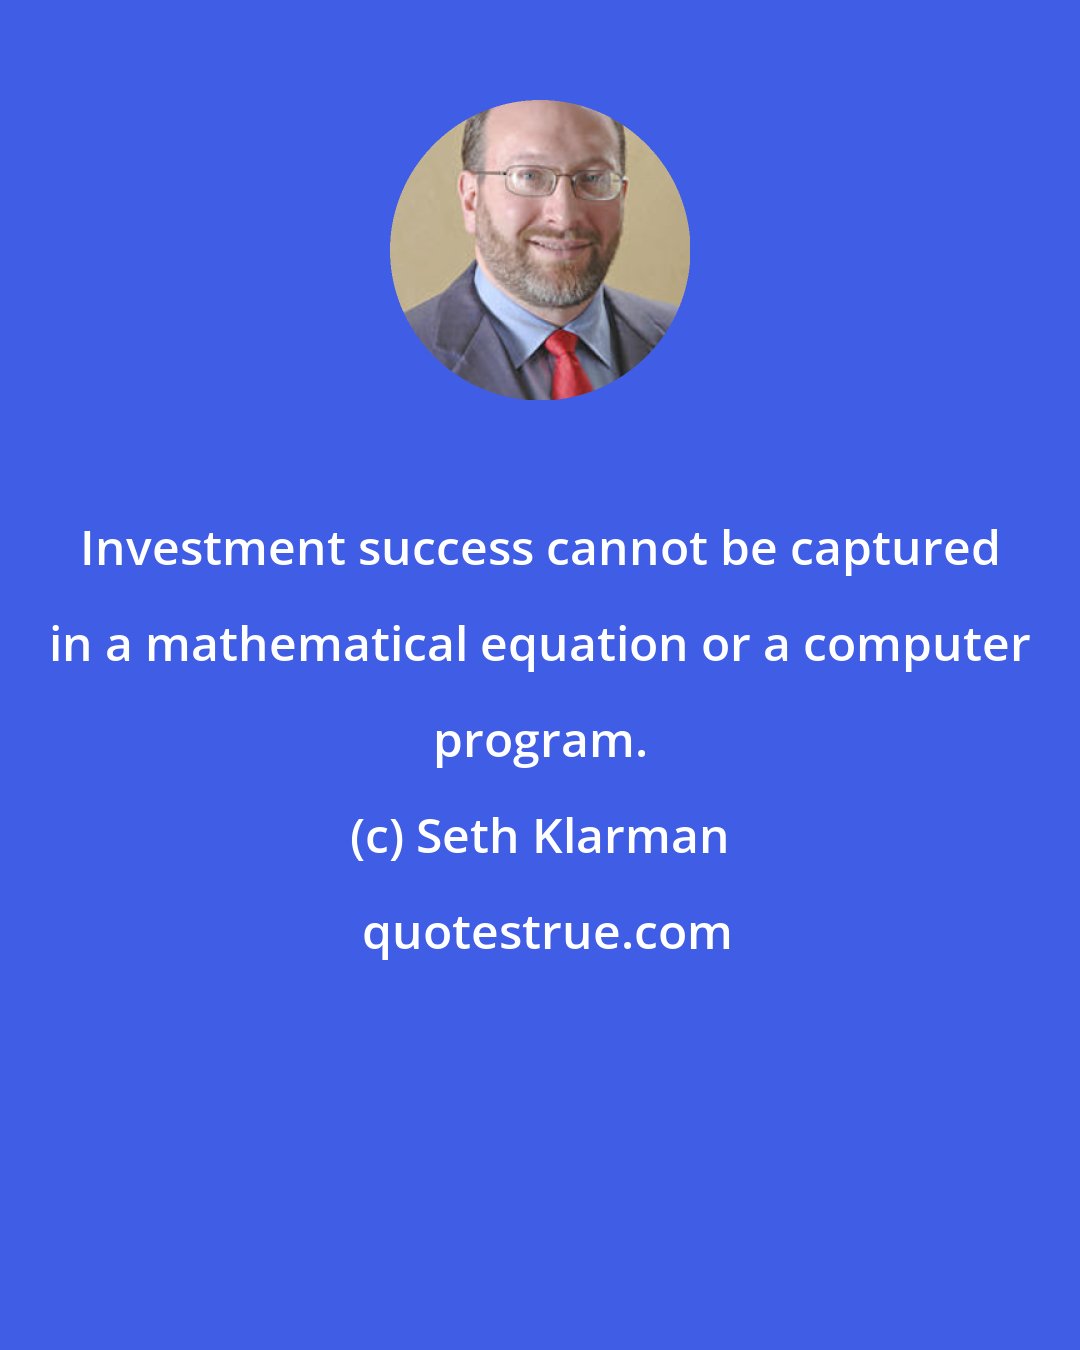 Seth Klarman: Investment success cannot be captured in a mathematical equation or a computer program.